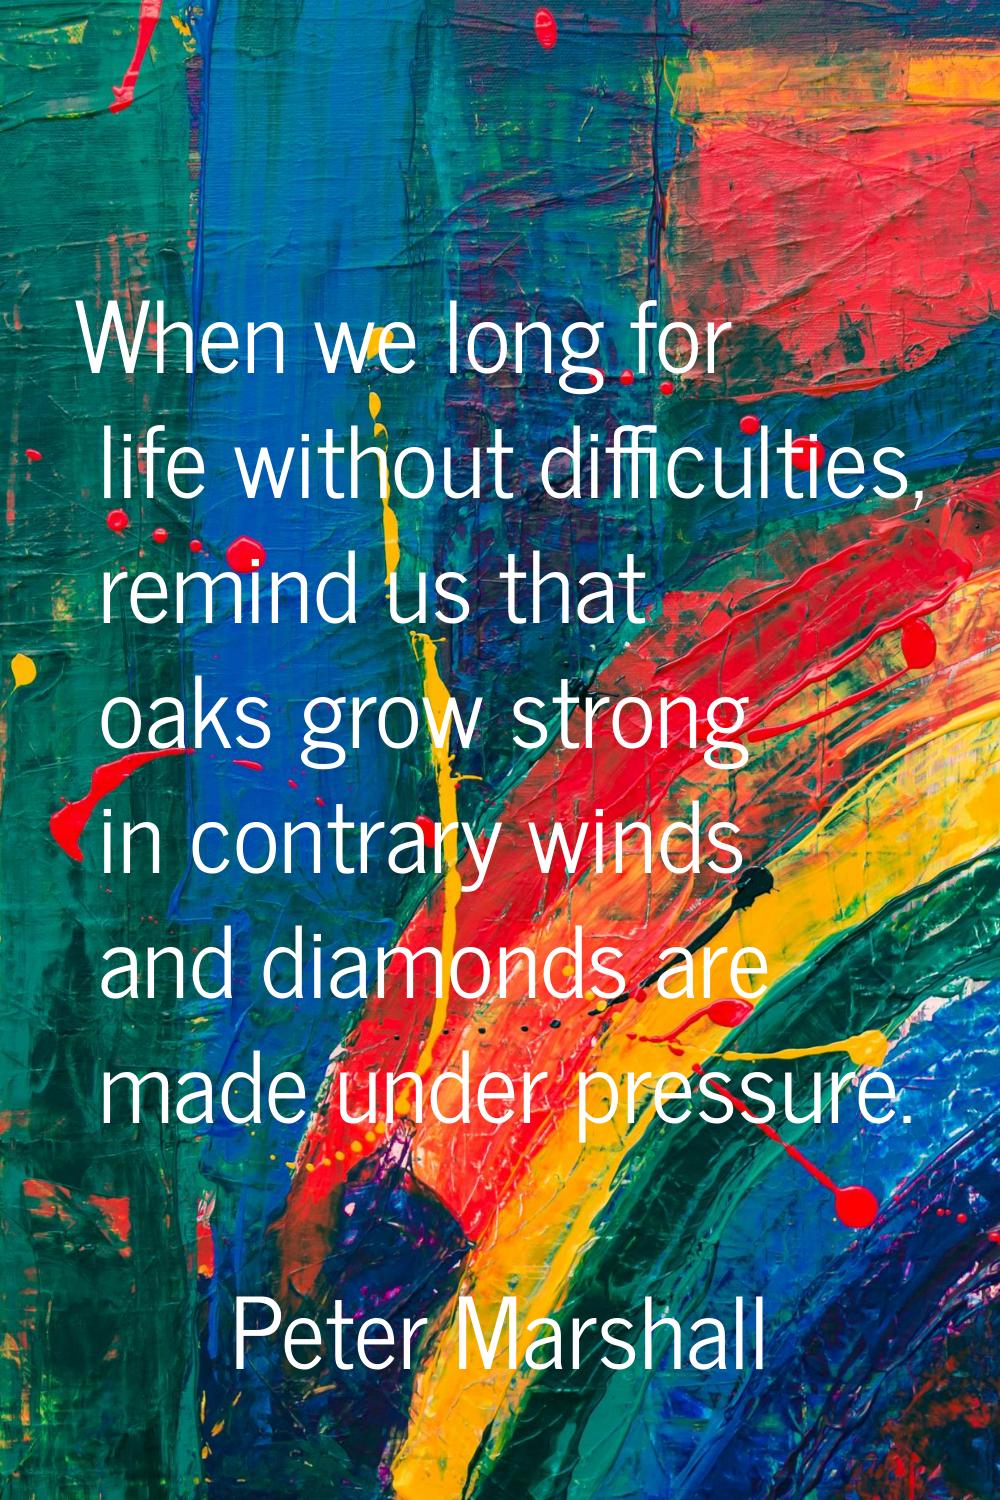 When we long for life without difficulties, remind us that oaks grow strong in contrary winds and d